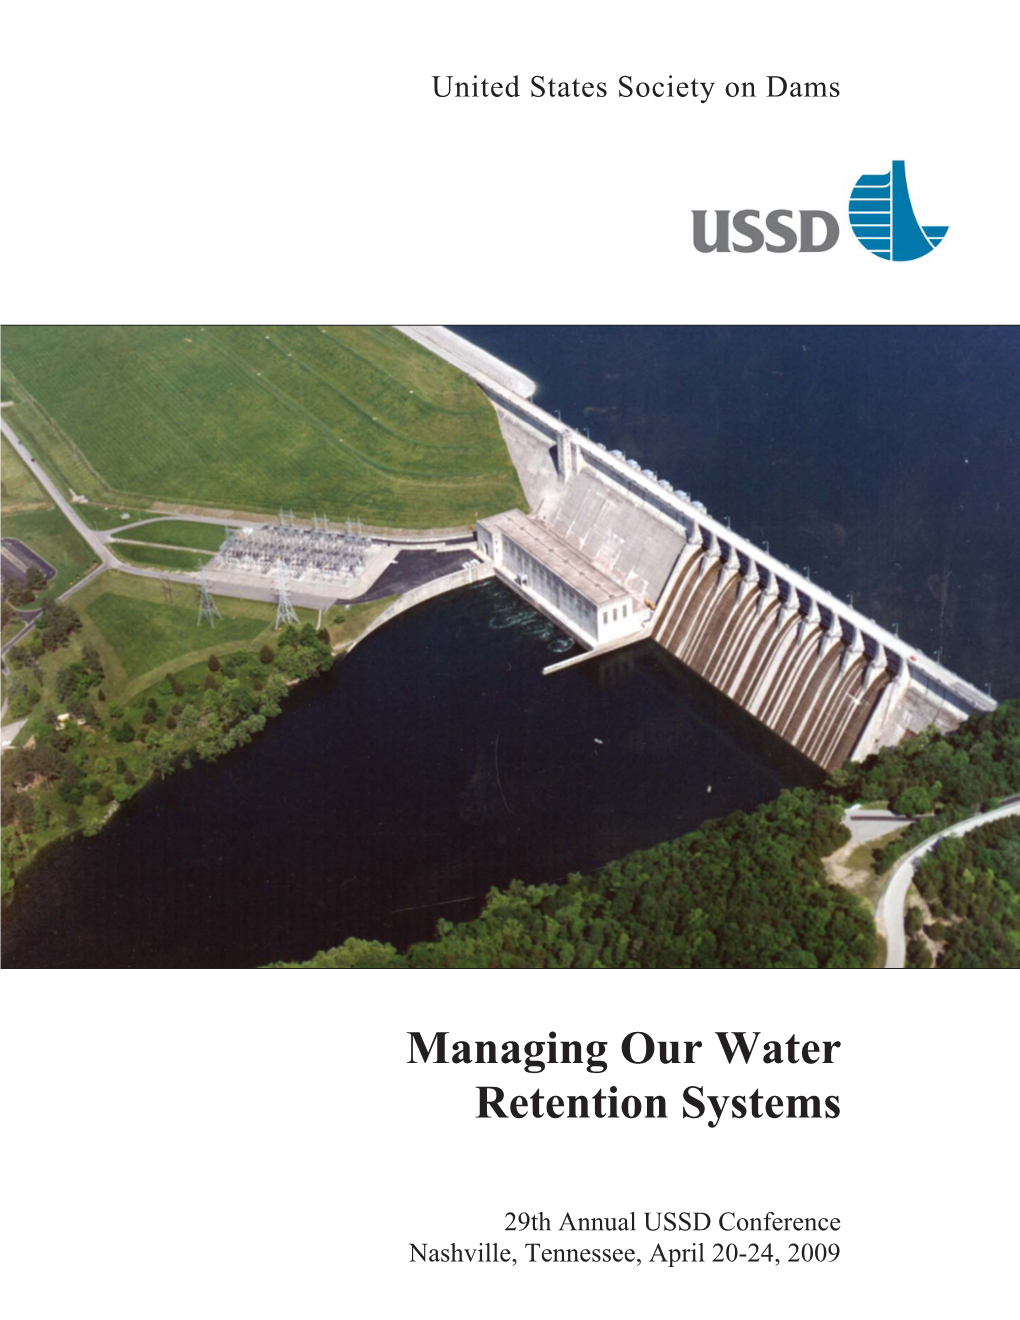 Managing Our Water Retention Systems